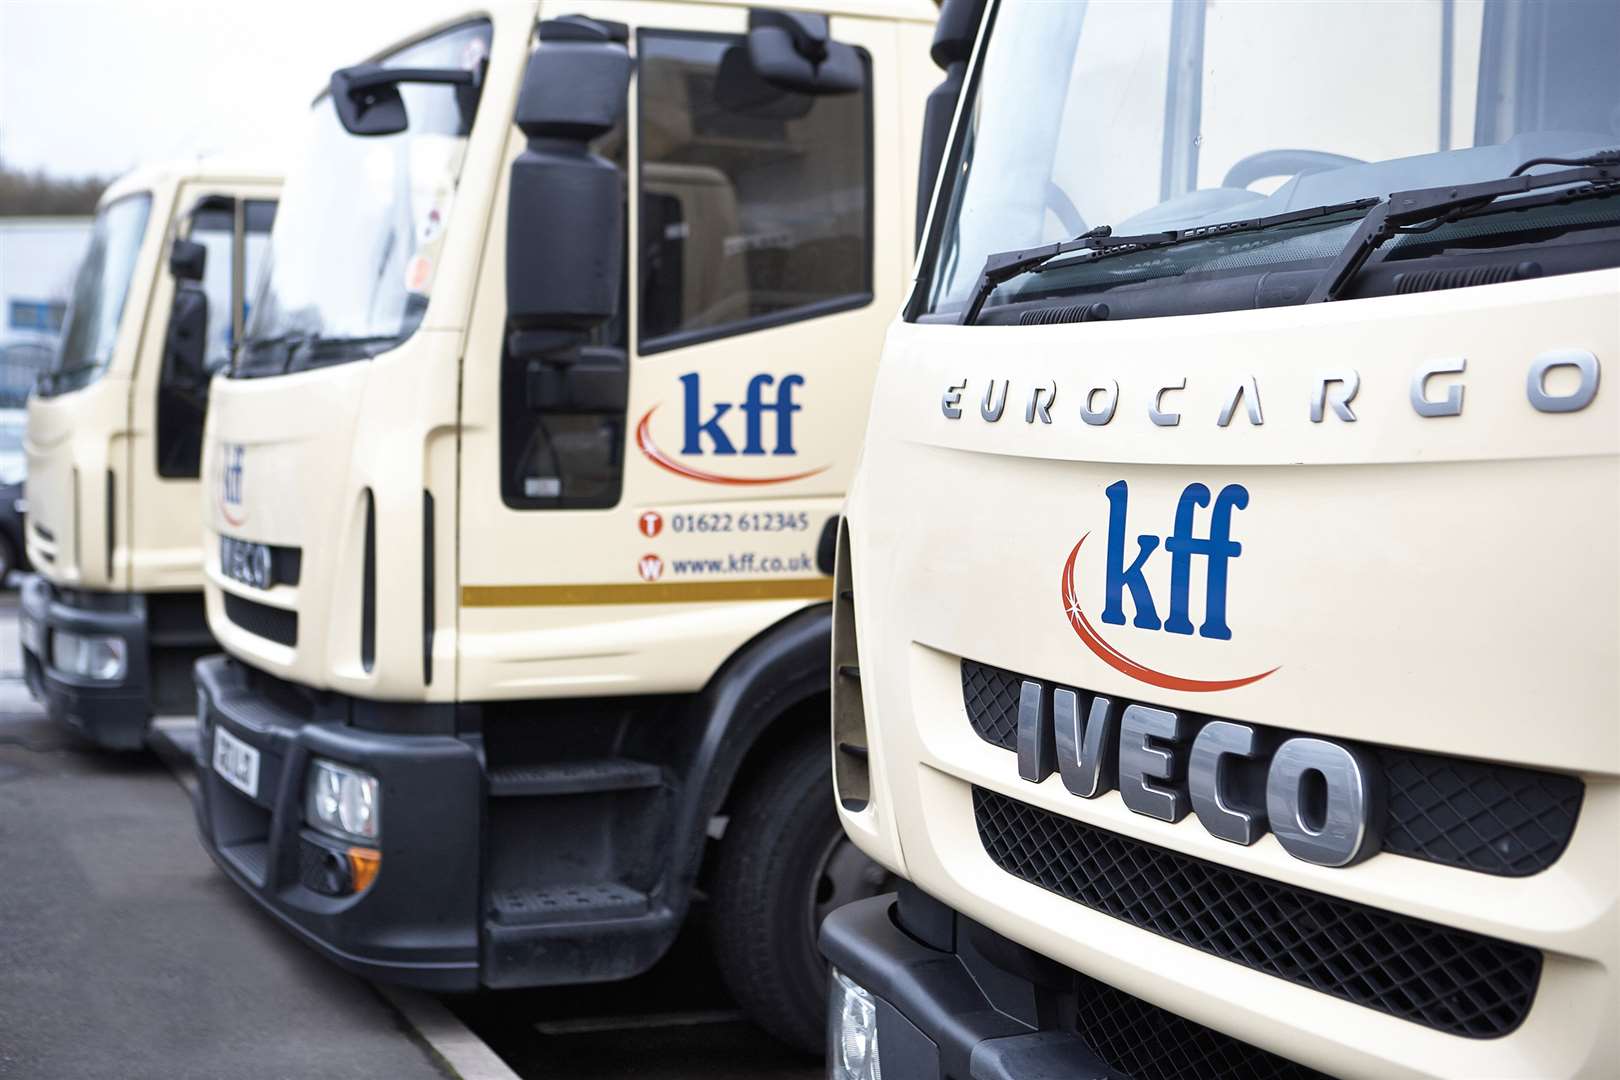 kff has signed its largest ever contract